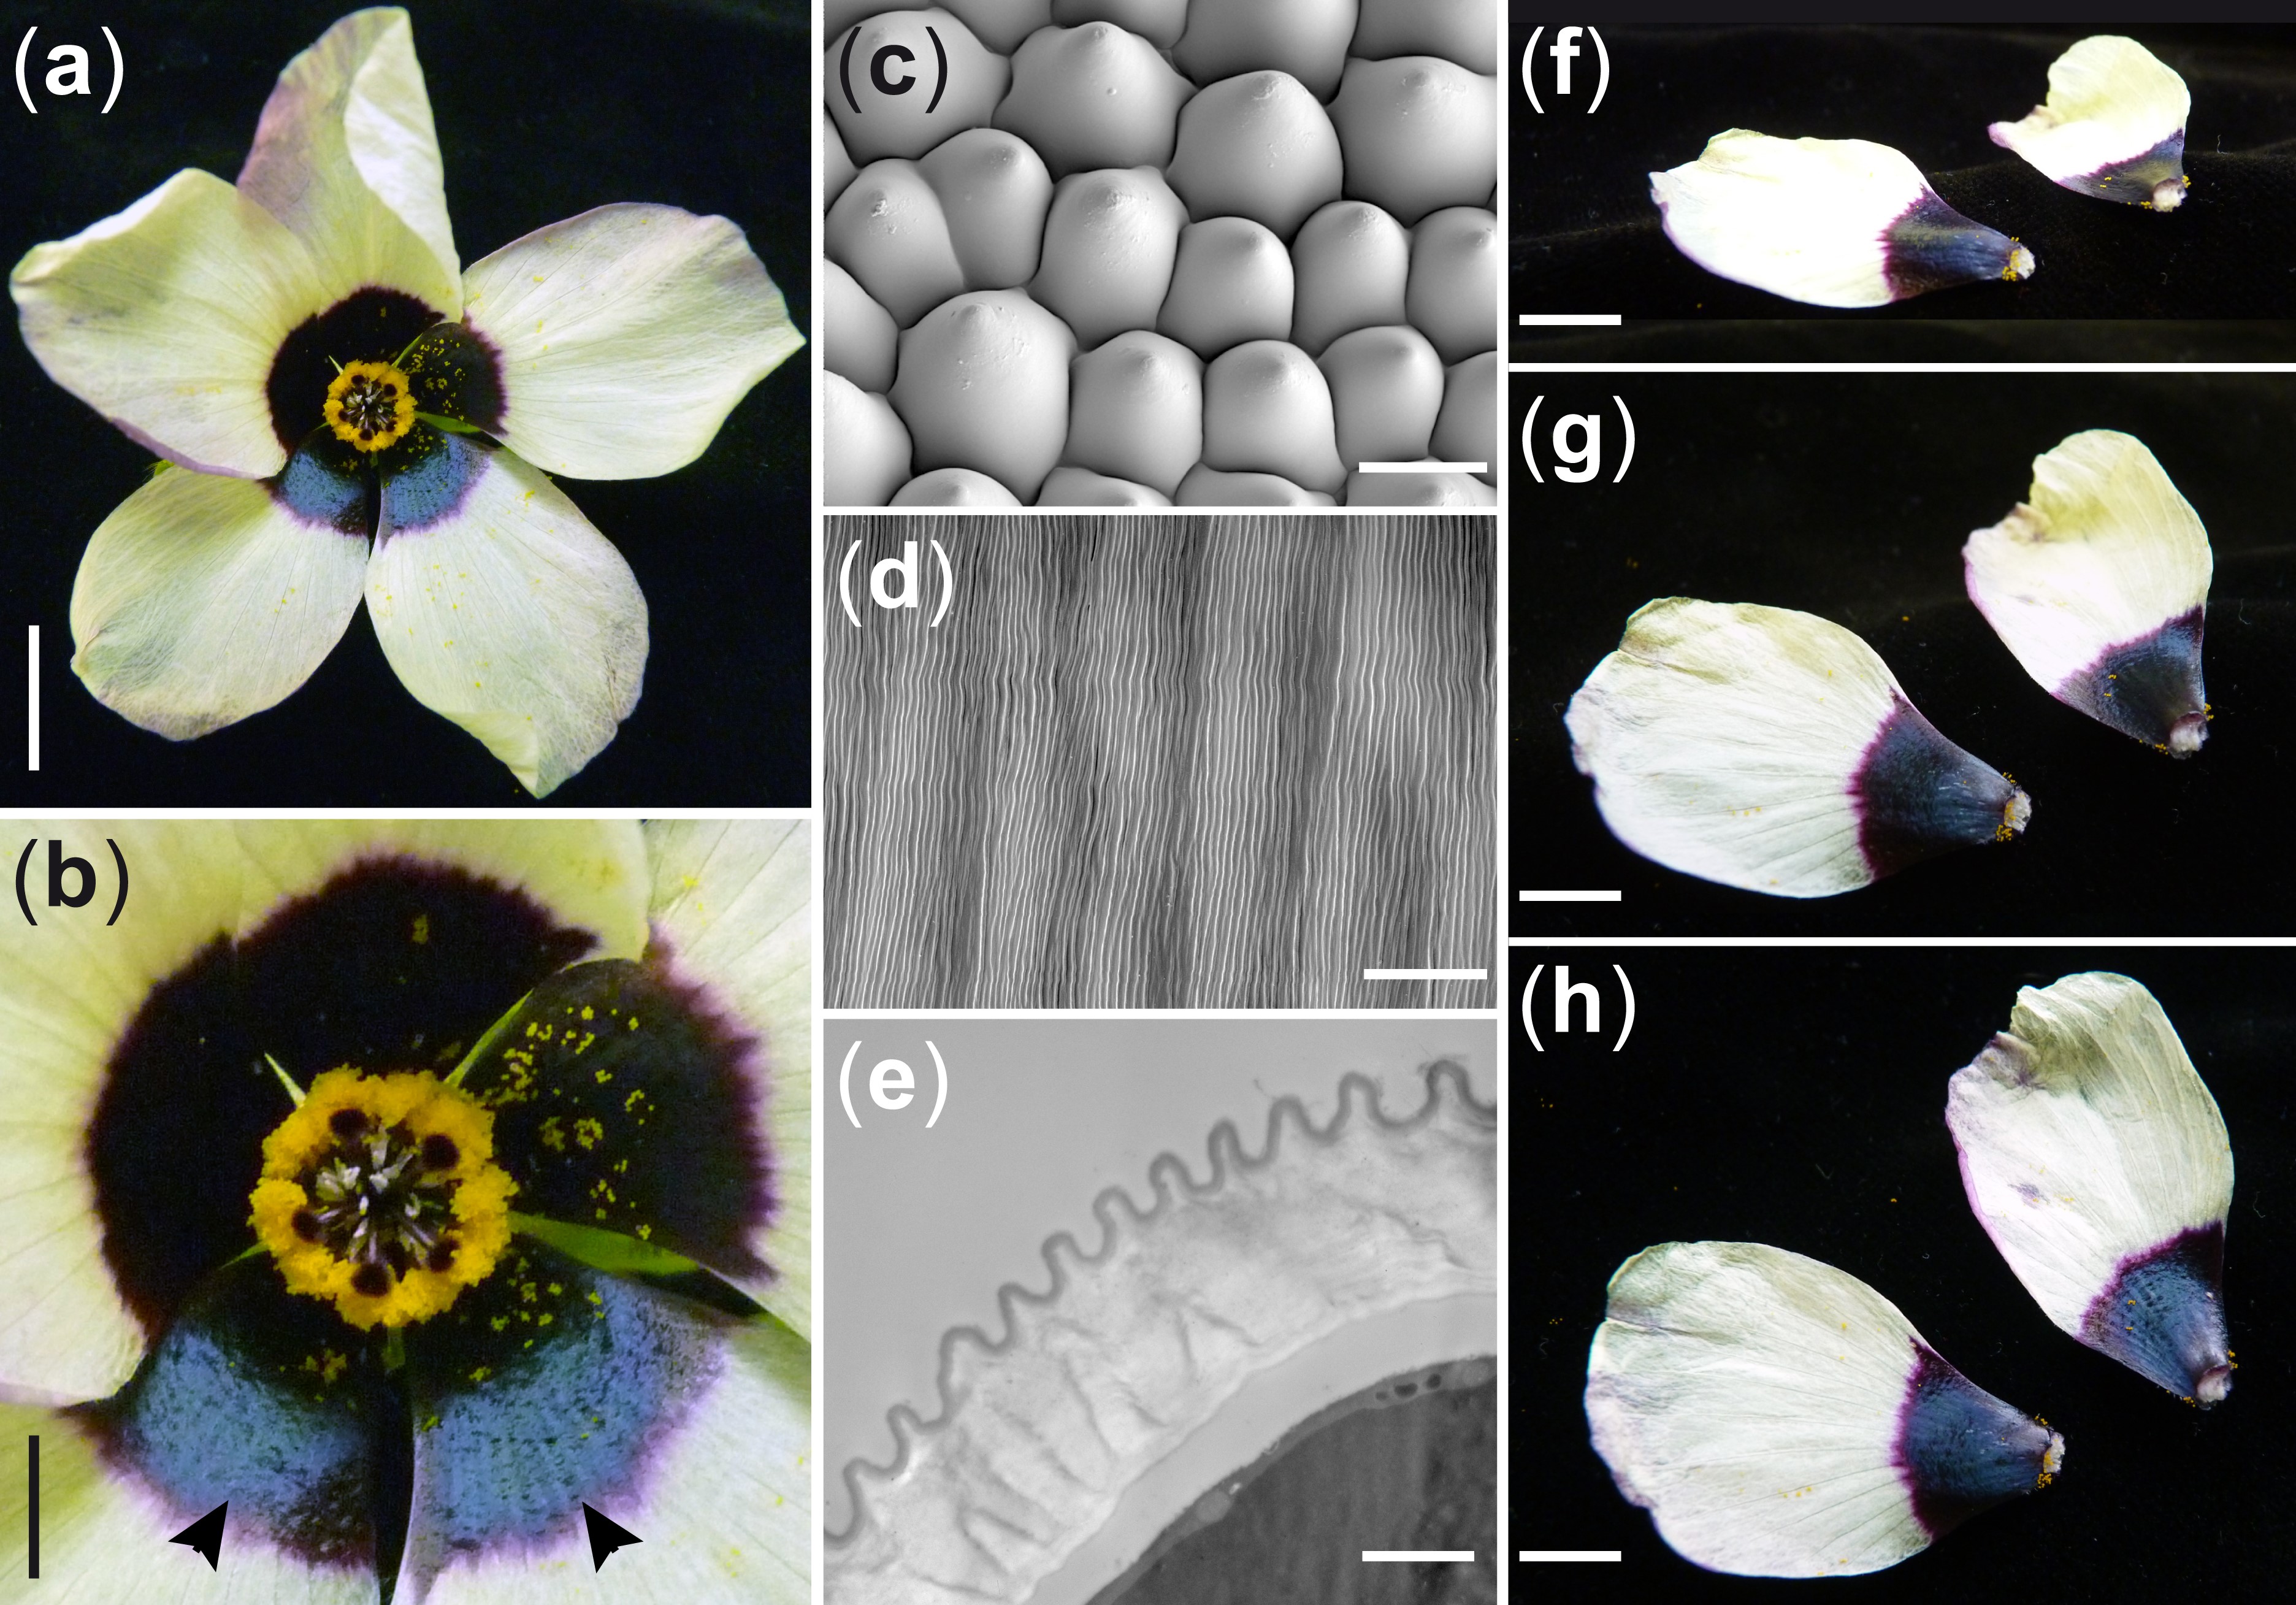 Figure showing both conical petal epidermal cells and iridescence-producing nanoscale ridges on the flower of Hibiscus trionum. (a) Flower of Hibiscus trionum with iridescent blue visible at the proximal part of the two lower petals. (b) Close up of (a), 